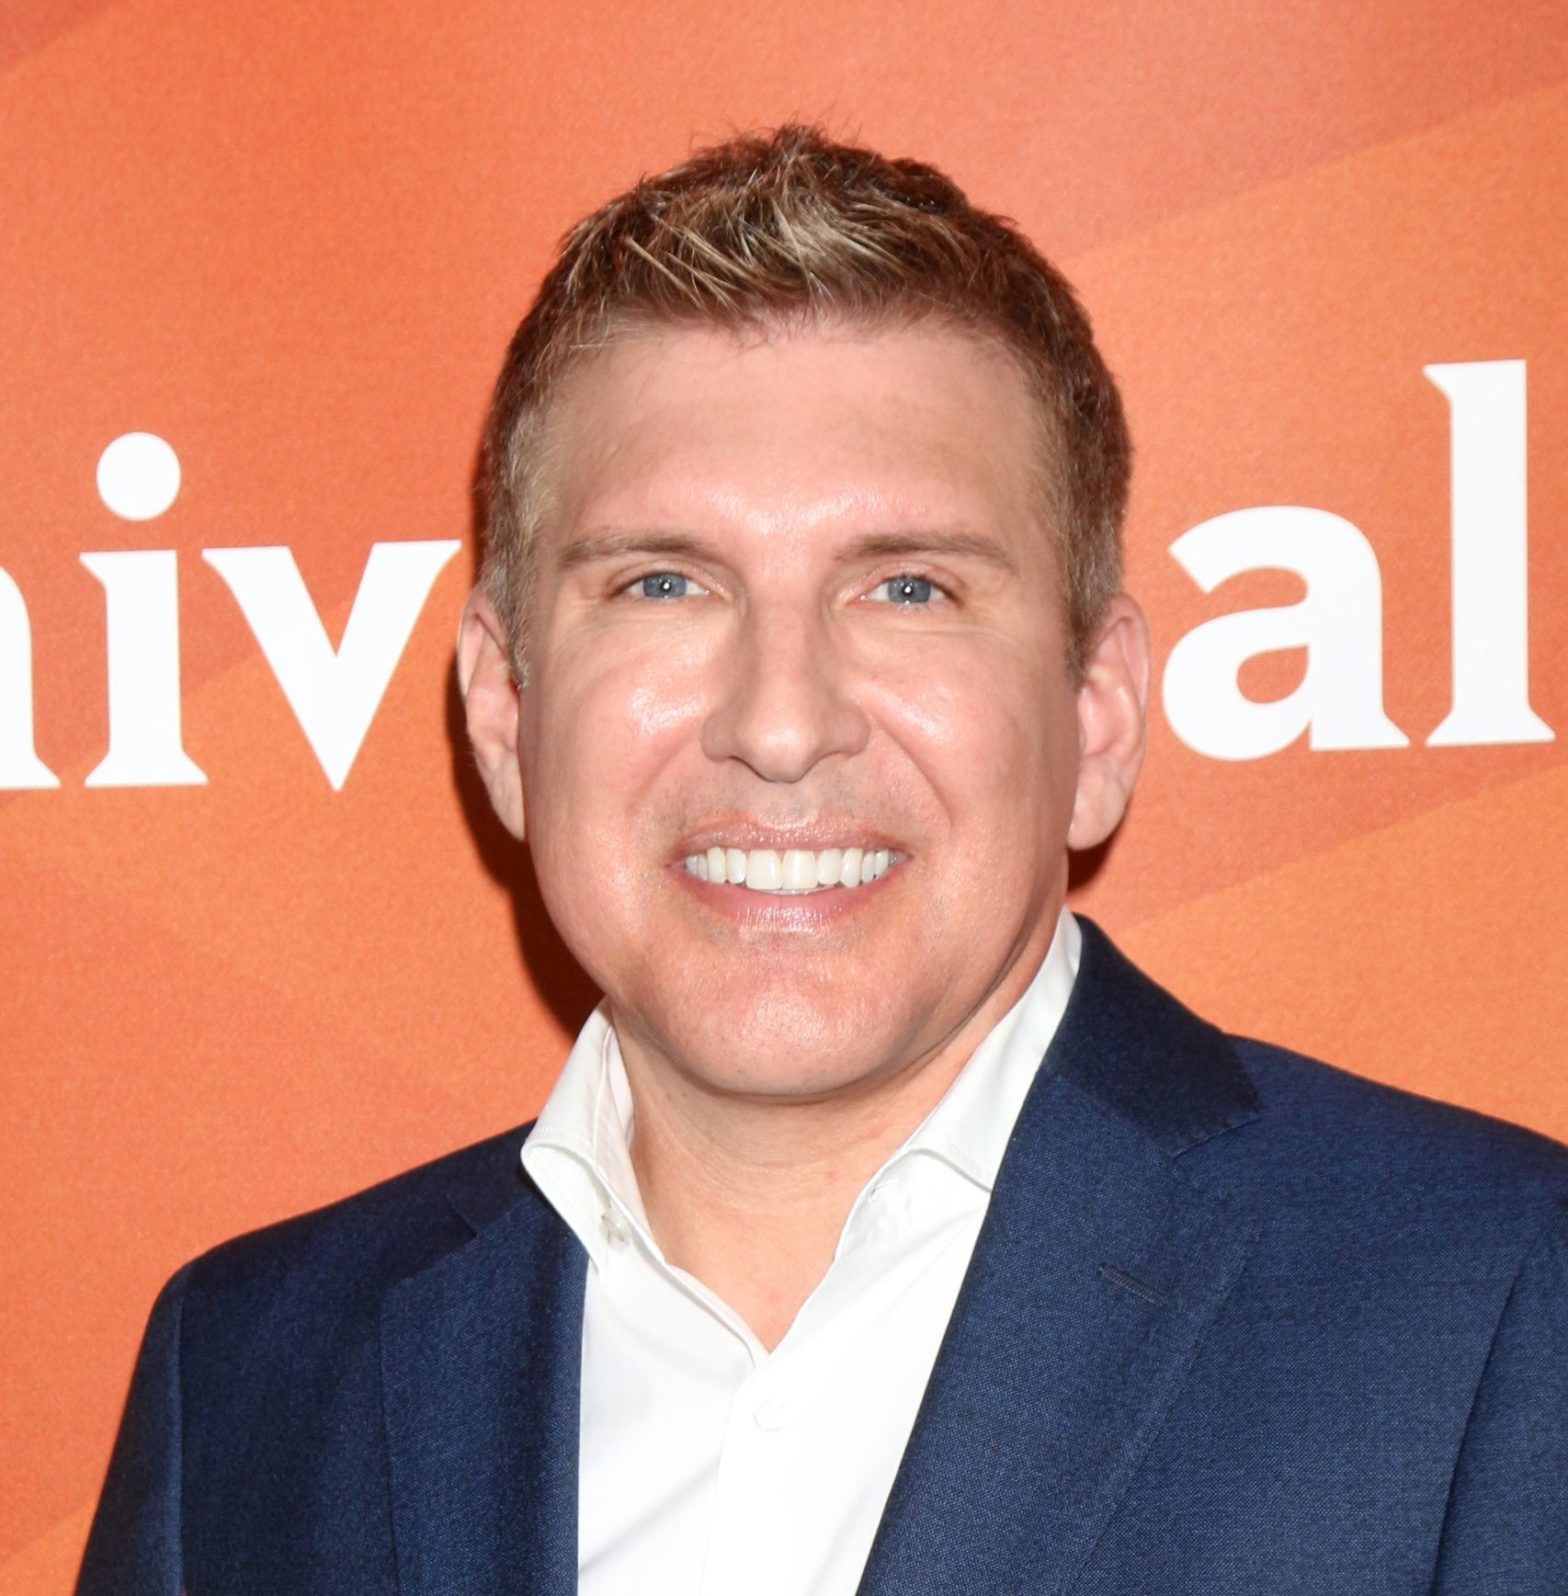 Todd Chrisley at the NBC Universal Summer Press Day 2016. prison reforrm